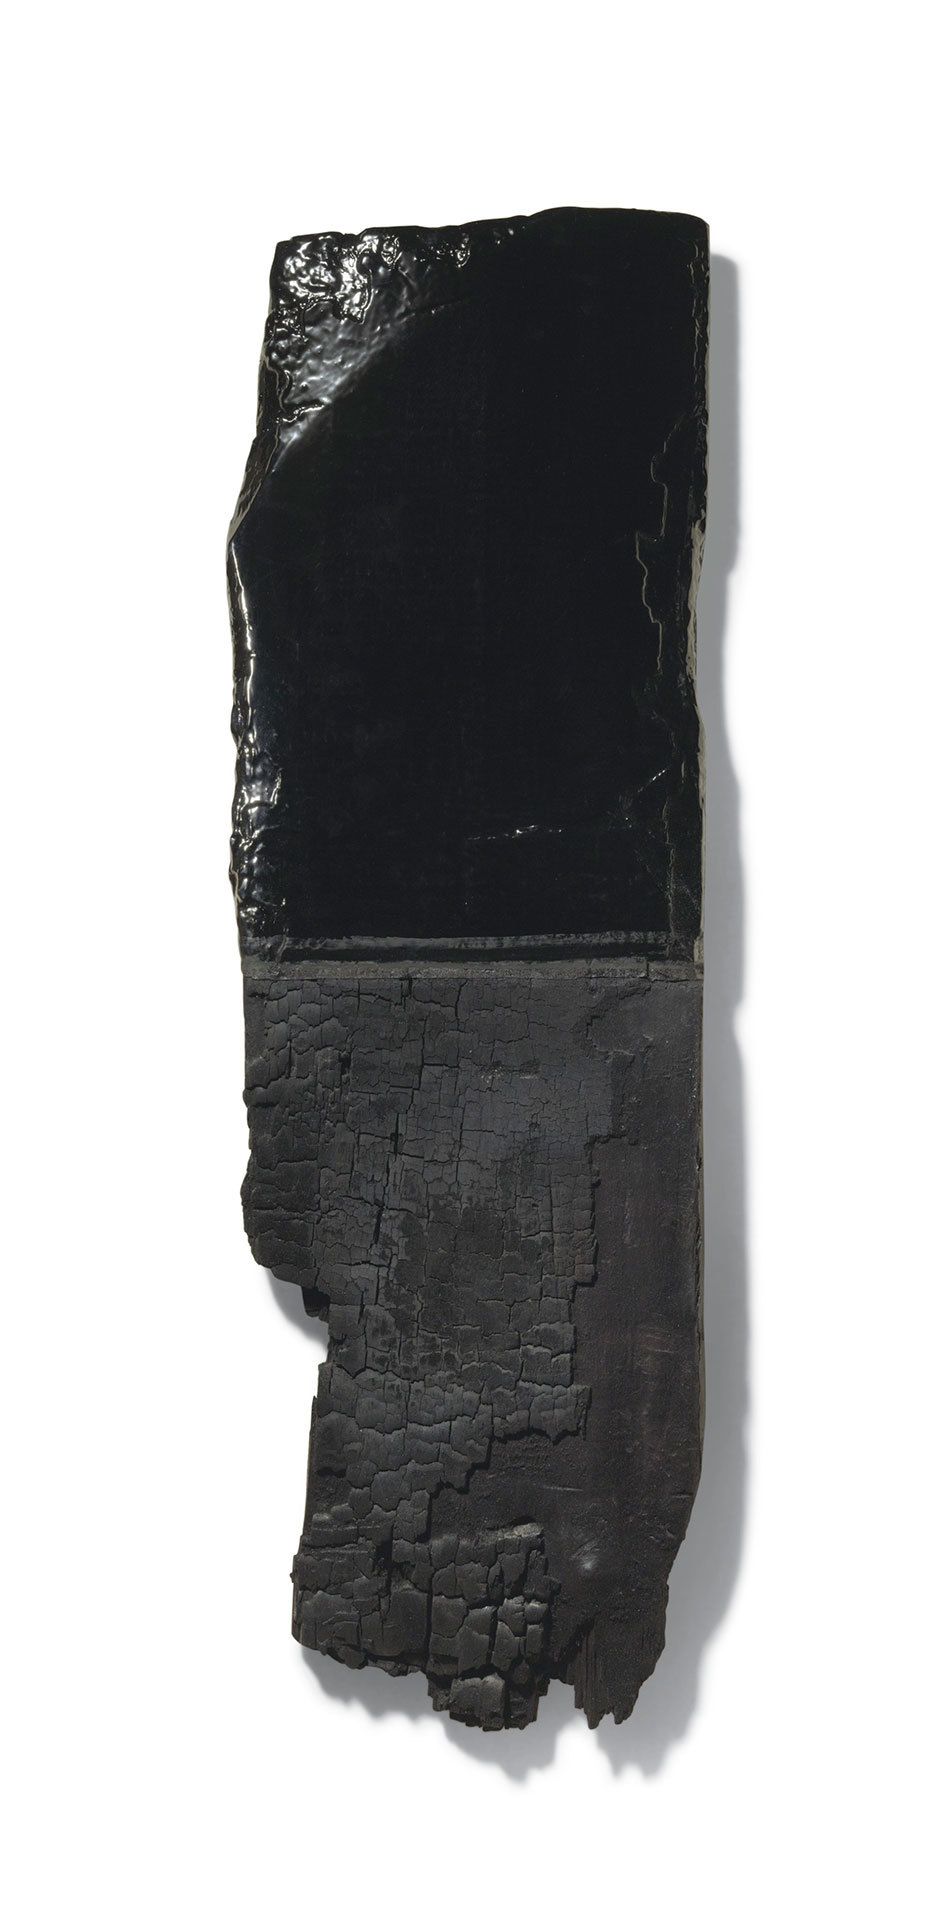 Simon Starling: ‘Layers of Darkness (Charred, Lacquered)’.